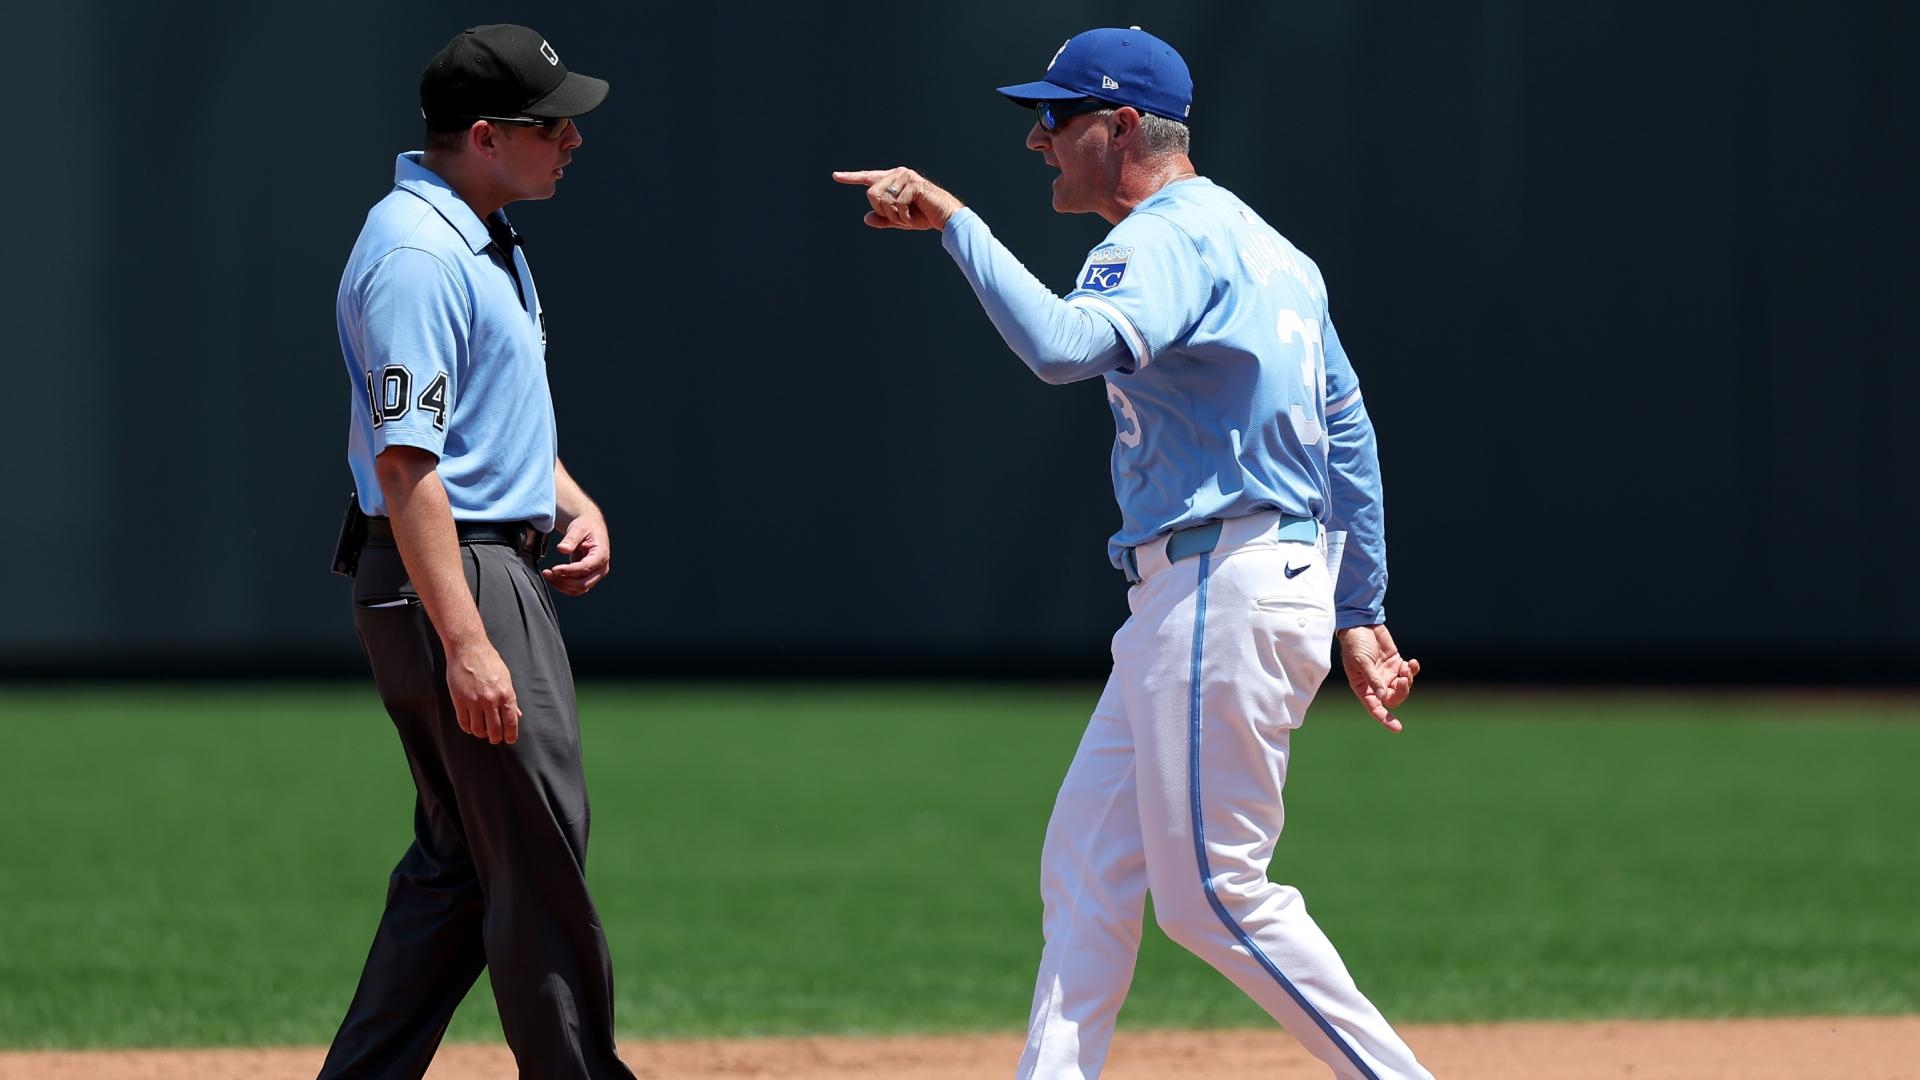 Royals manager ejected after heated exchange with umpire